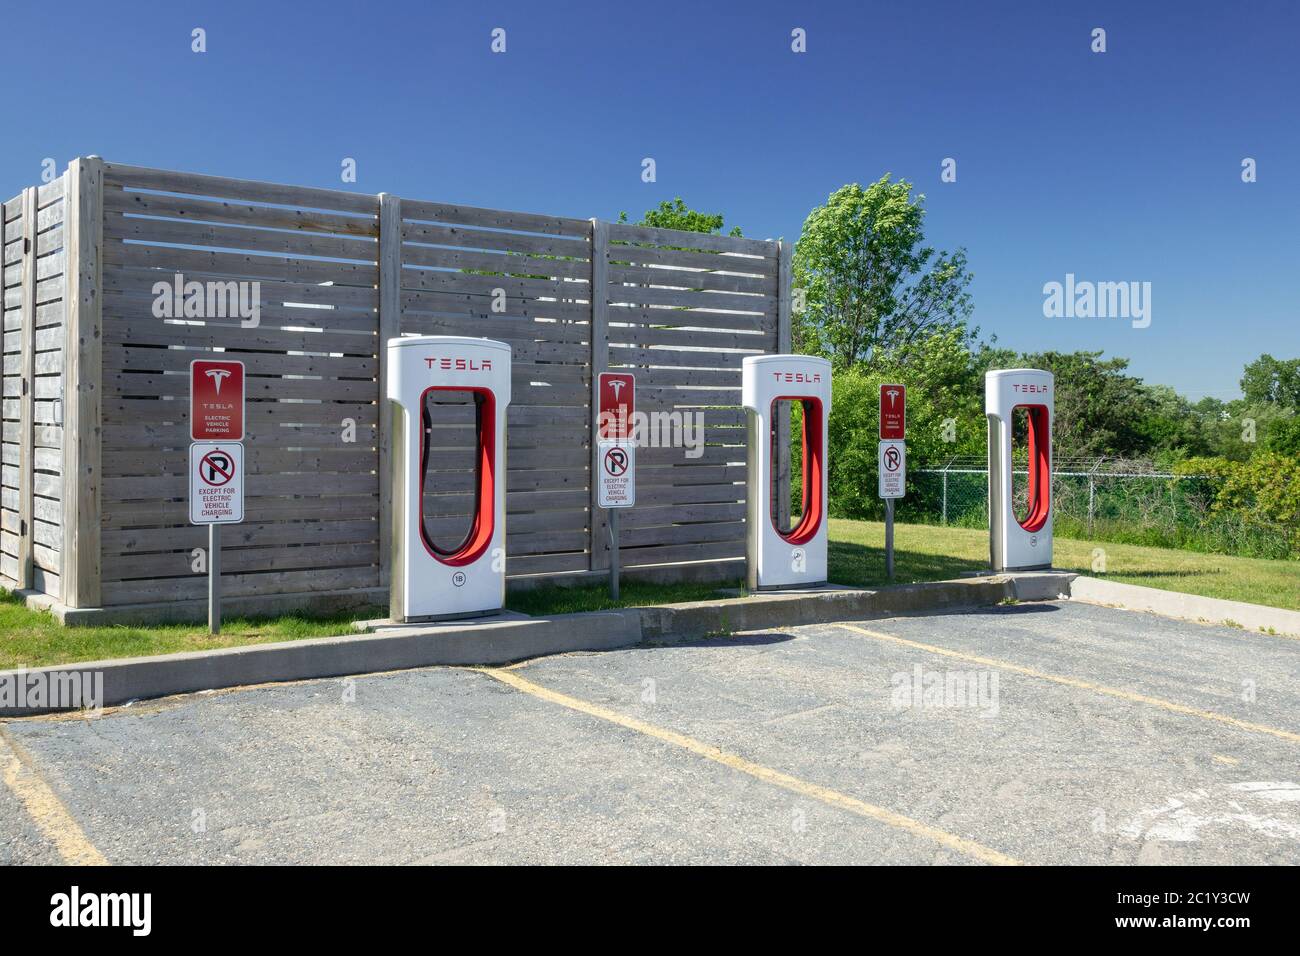 Tesla Electric Car Charging Station Supercharging Network In Woodstock Ontario Canada Stock Photo